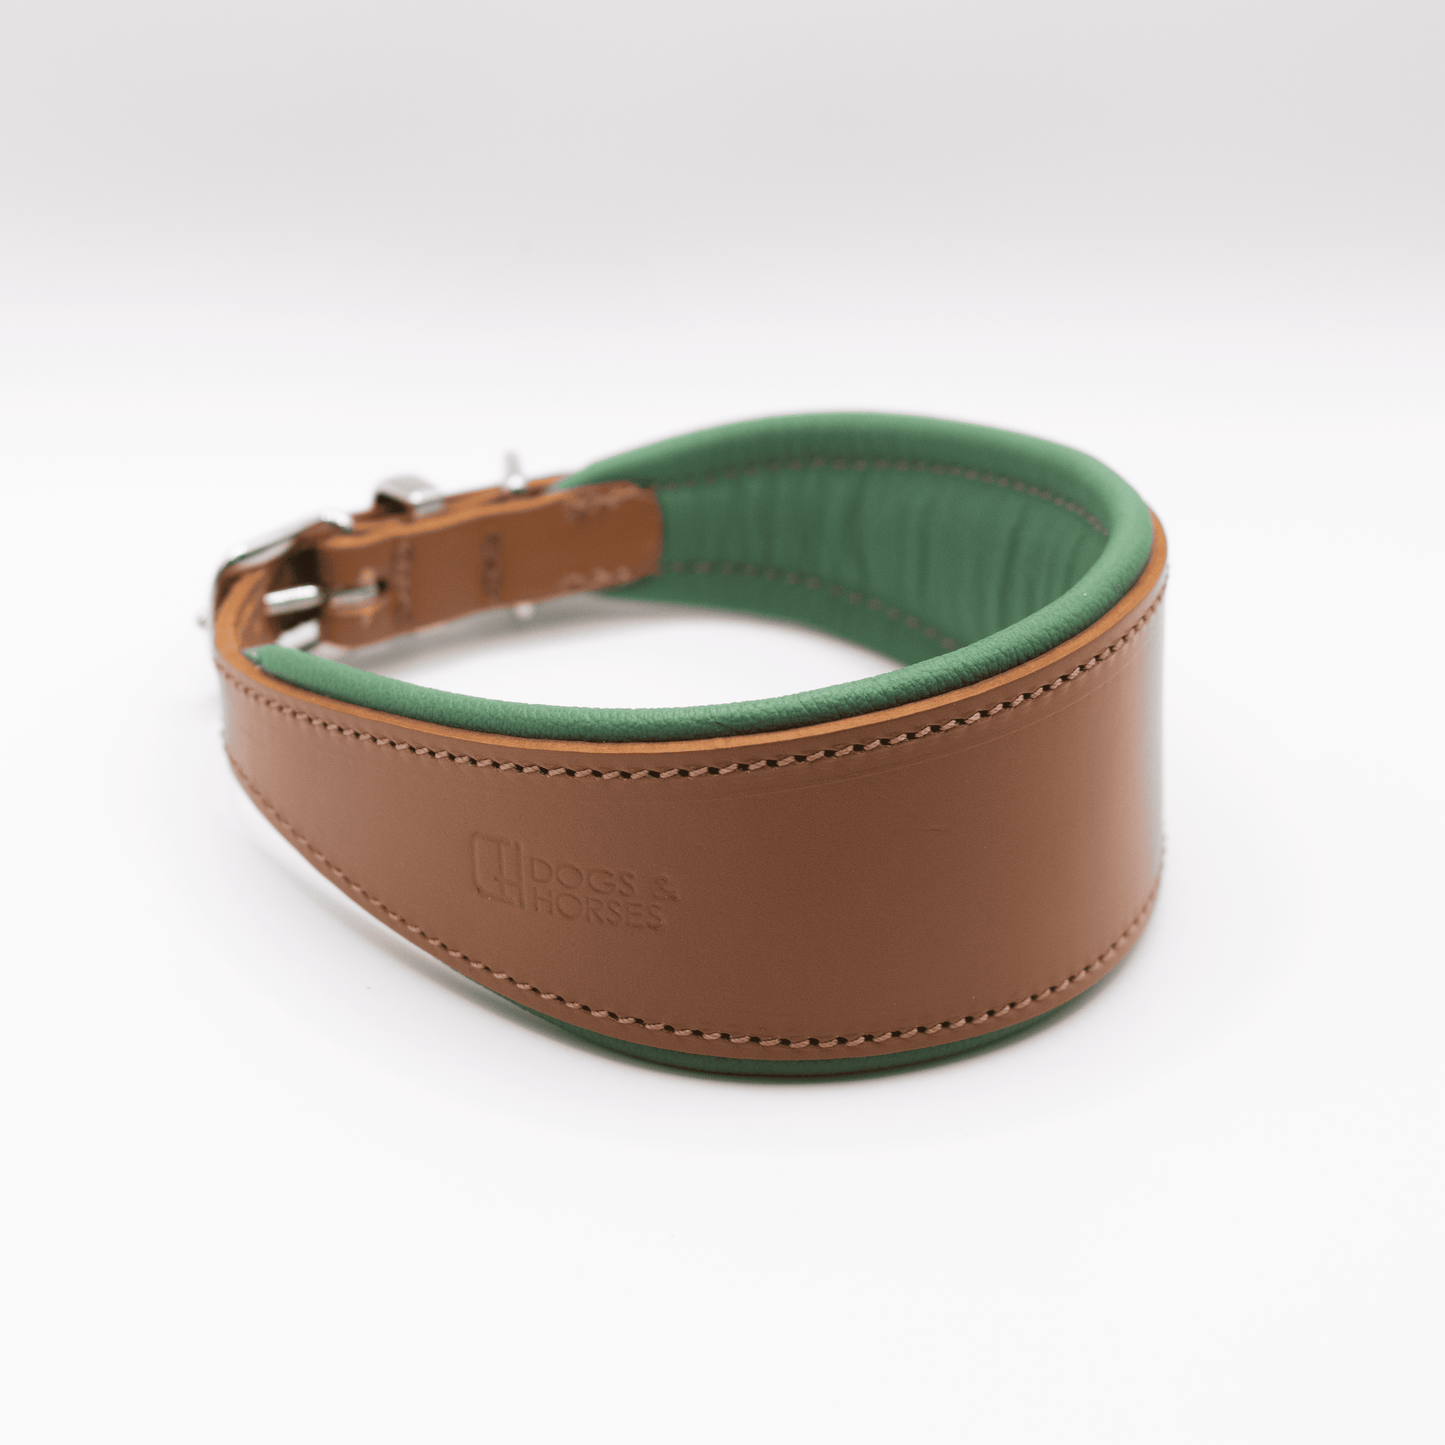 D&H Padded Leather Hound Collar Tan and Clover